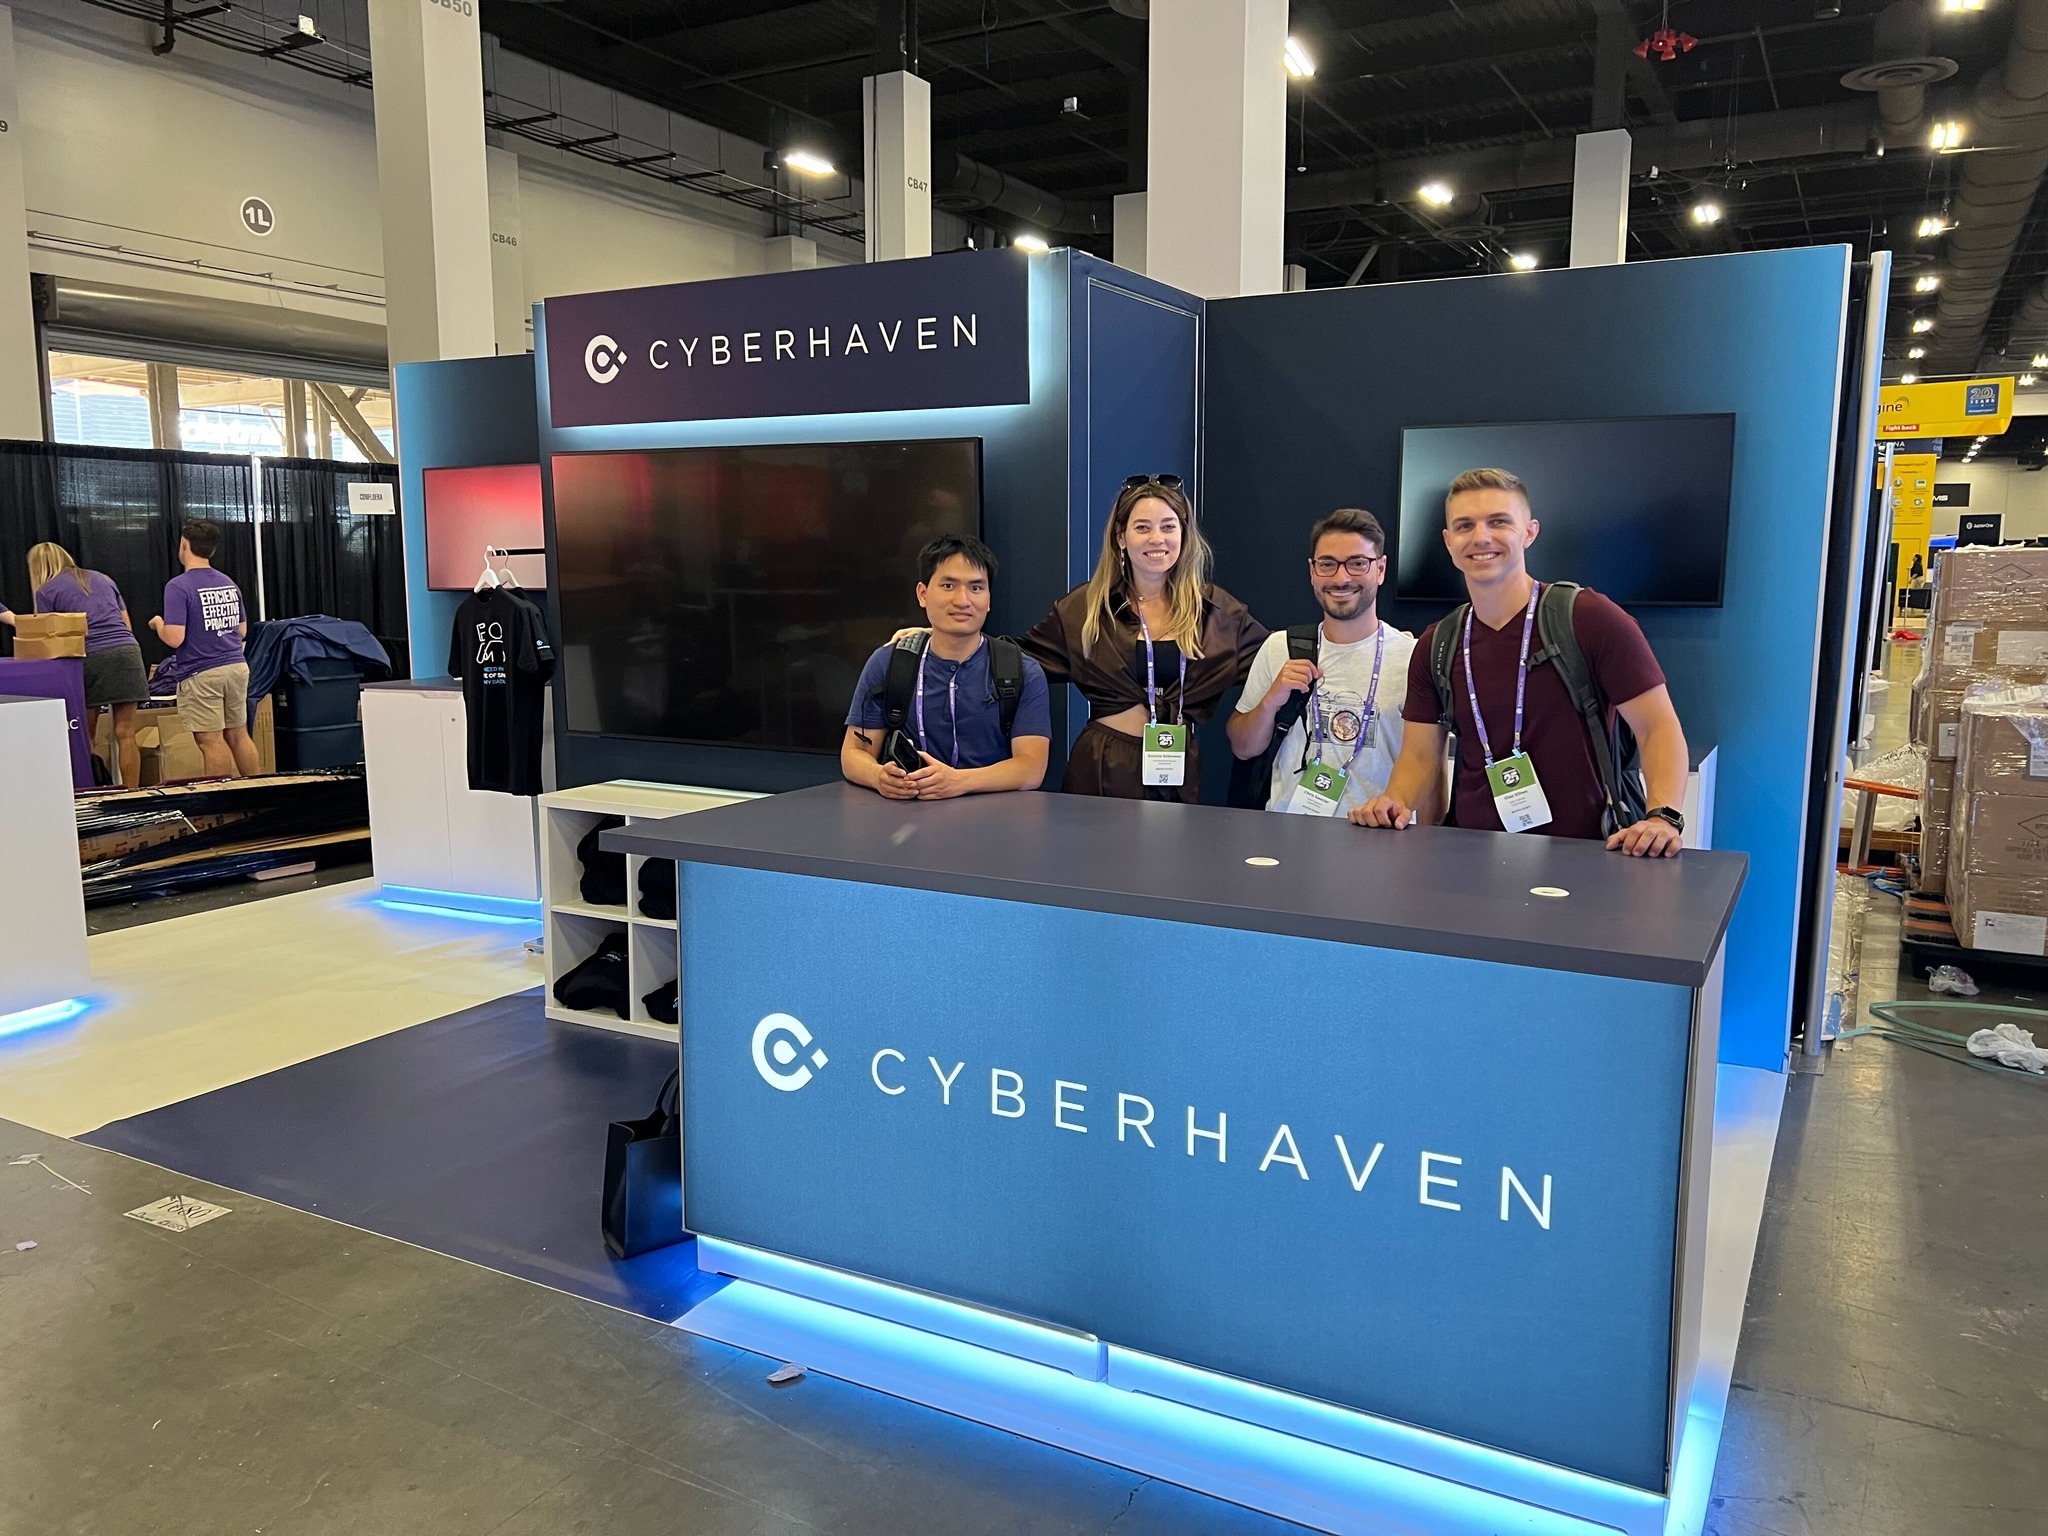 About Cyberhaven